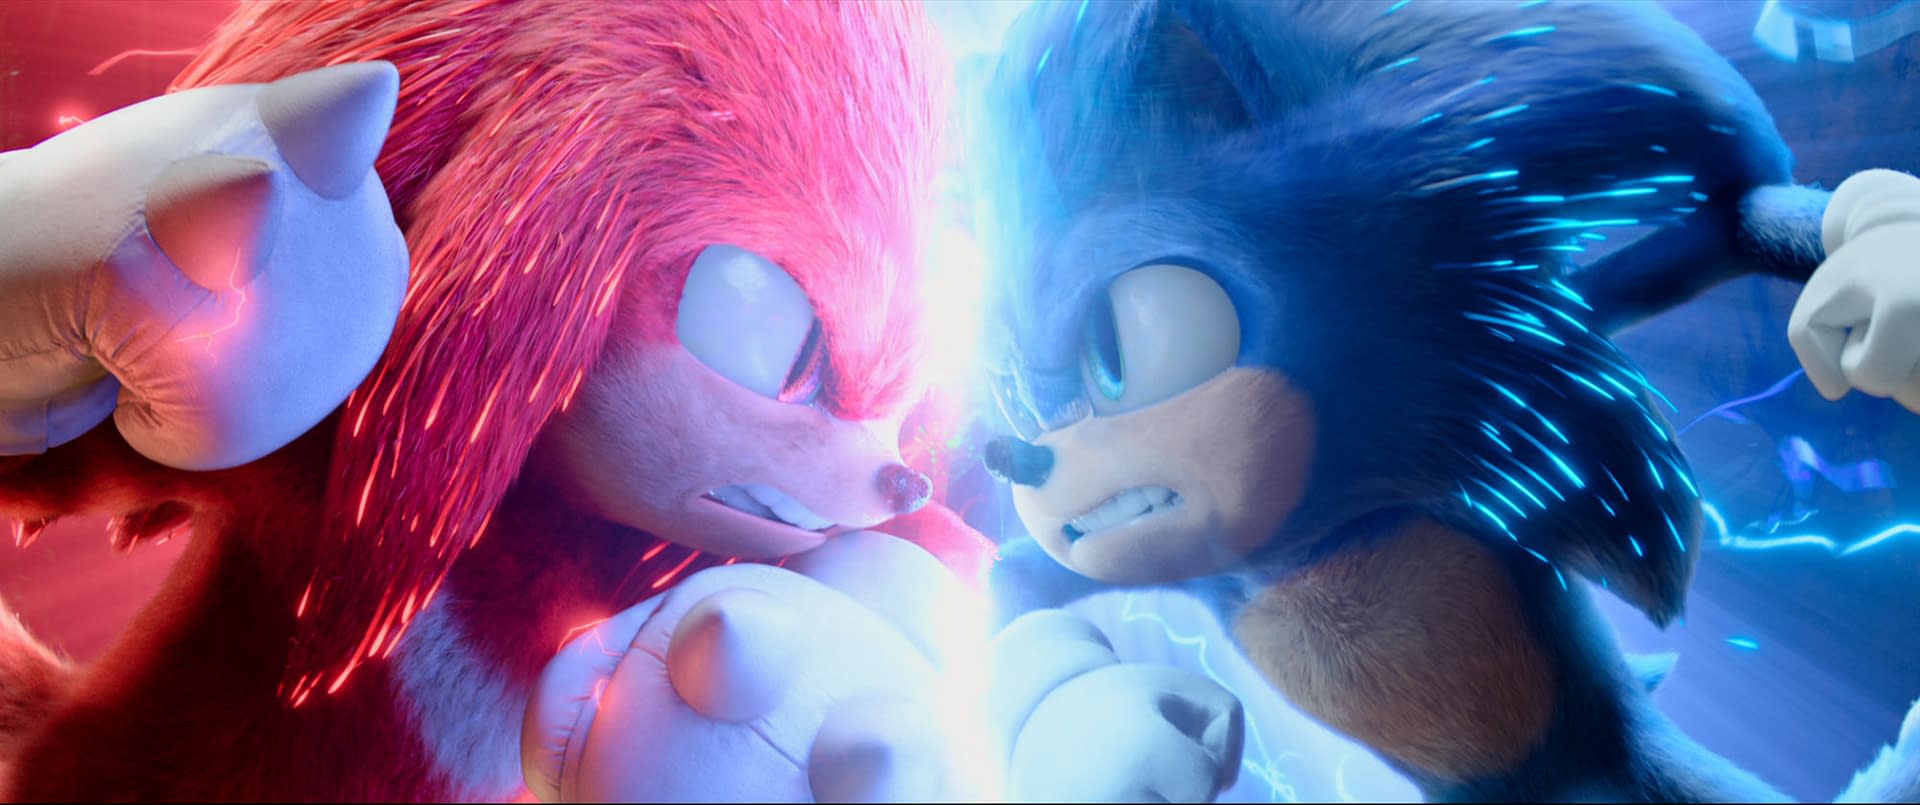 New Sonic Movie 2 Poster Officially Revealed & Trailer Releasing Tomorrow!  